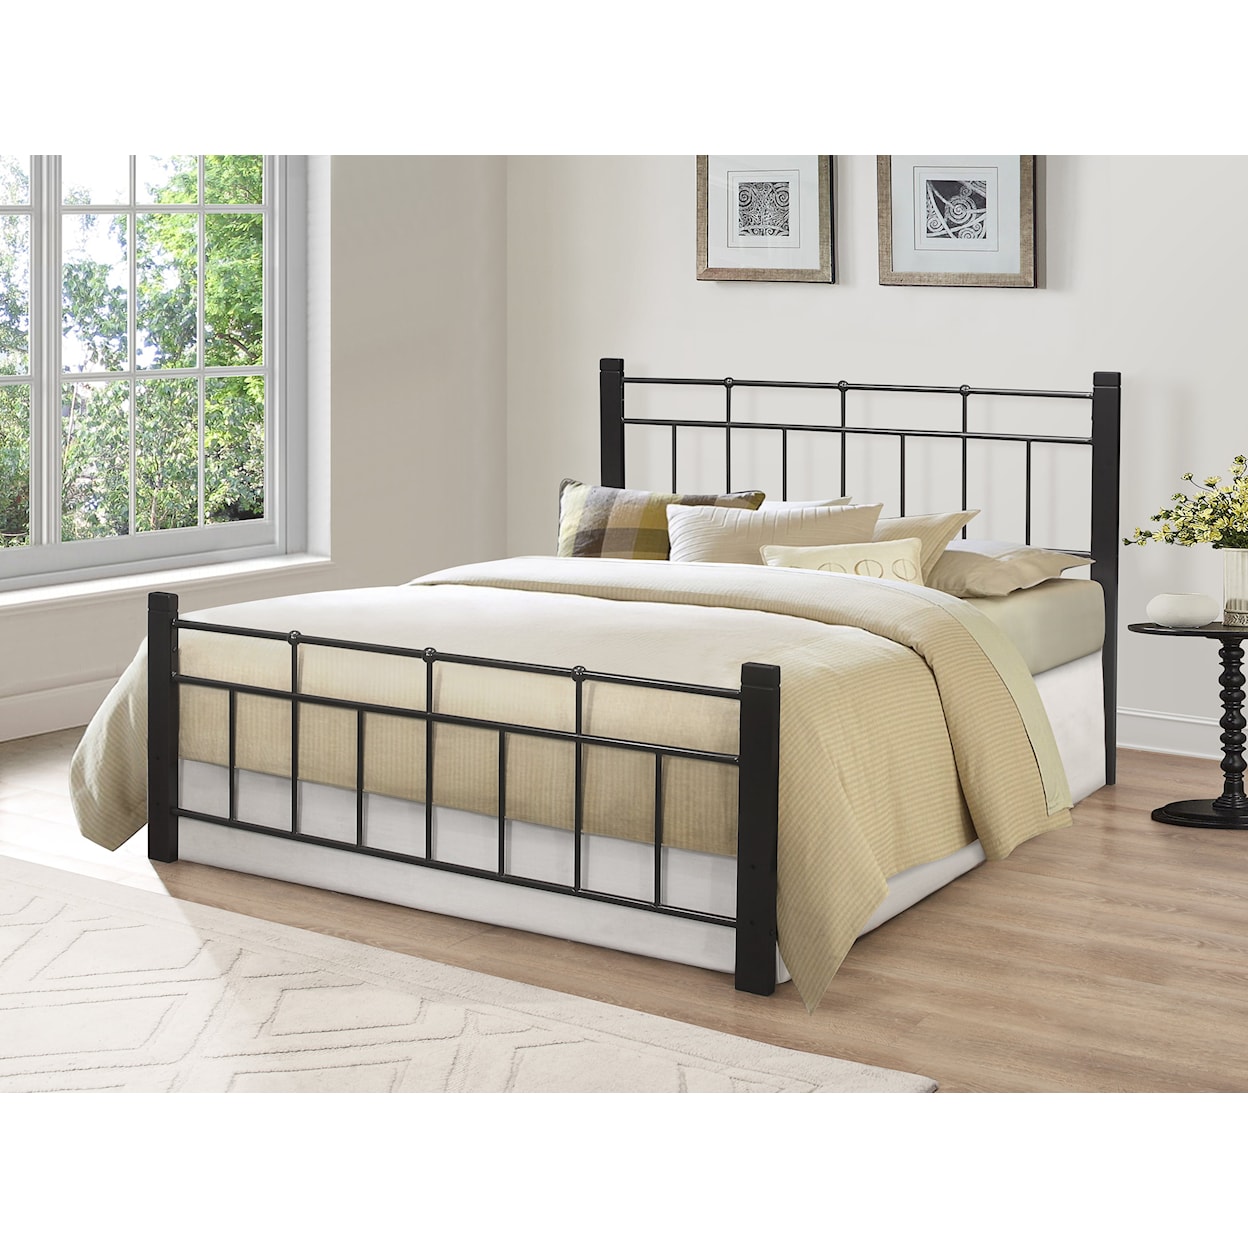 Hillsdale McGuire Twin Bed